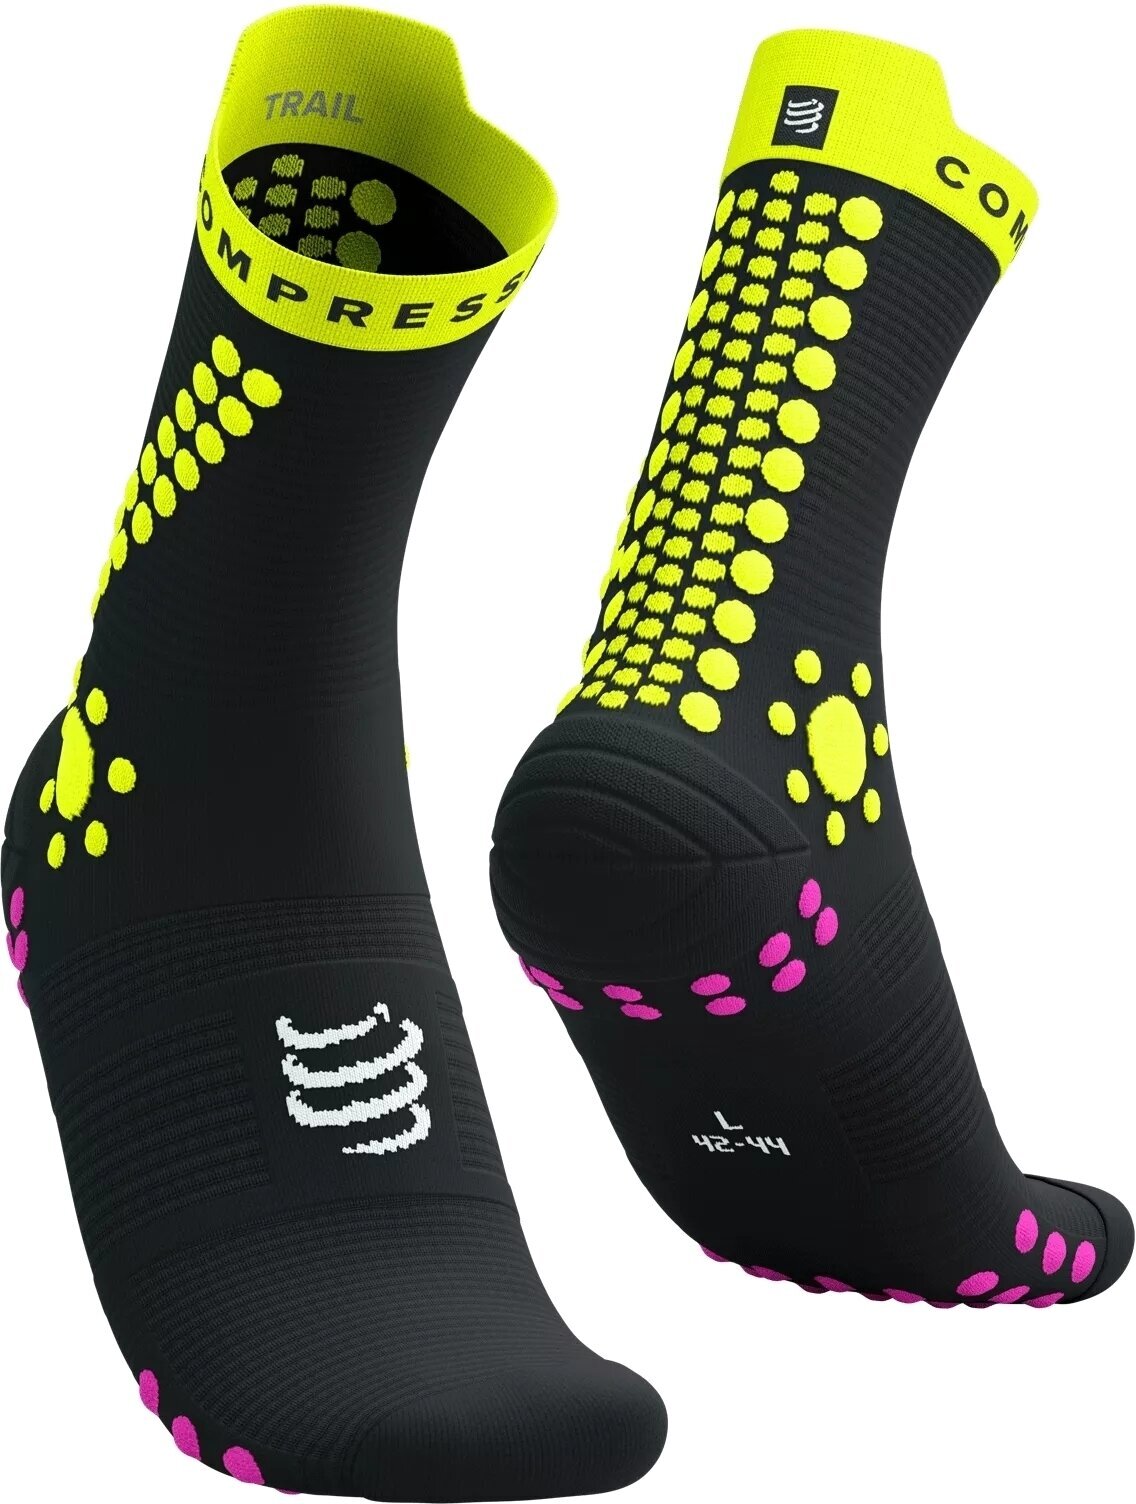 Calcetines para correr Compressport Pro Racing Socks V4.0 Trail Black/Safety Yellow/Neon Pink T4 Calcetines para correr